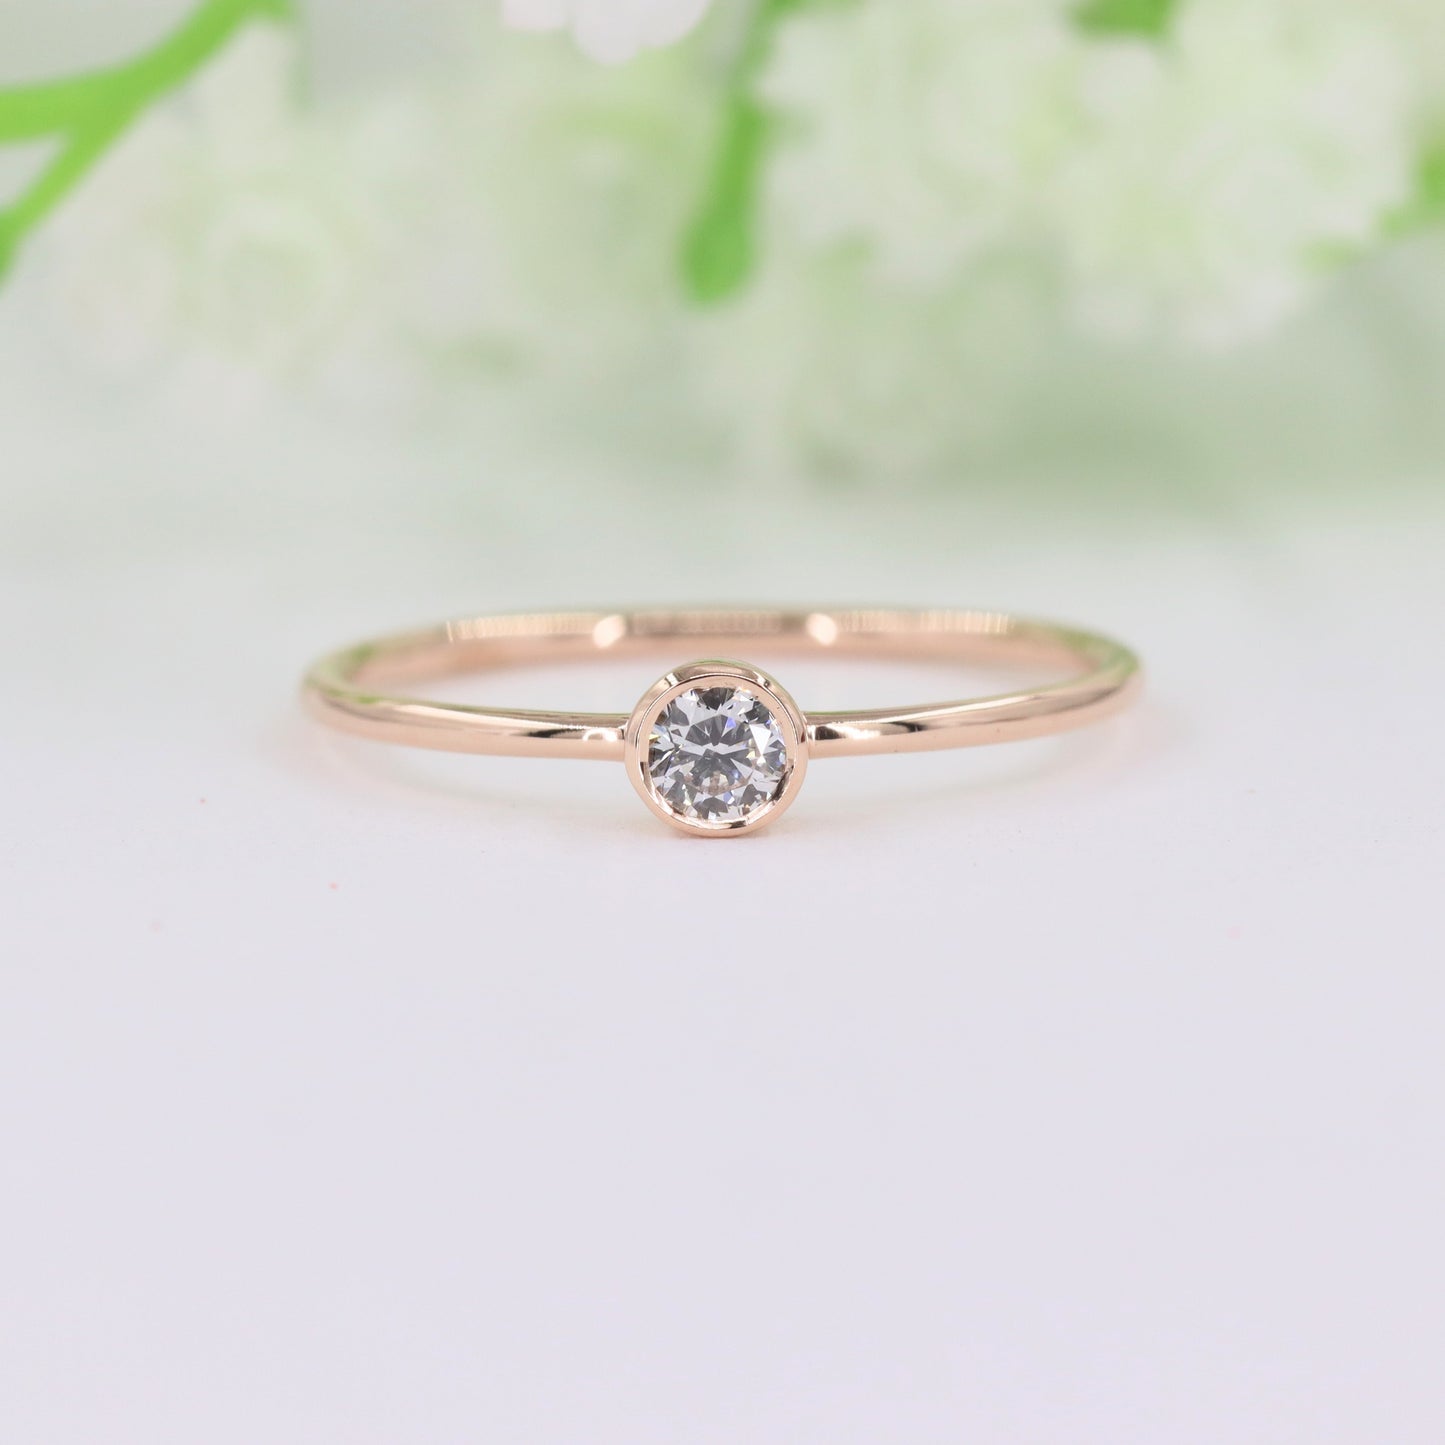 14K gold Straight Bezel 0.1ct Diamond Stackable Ring/ Dainty Ring/ Simple Engagement Ring/ Single Diamond Wedding Ring/Gift for her